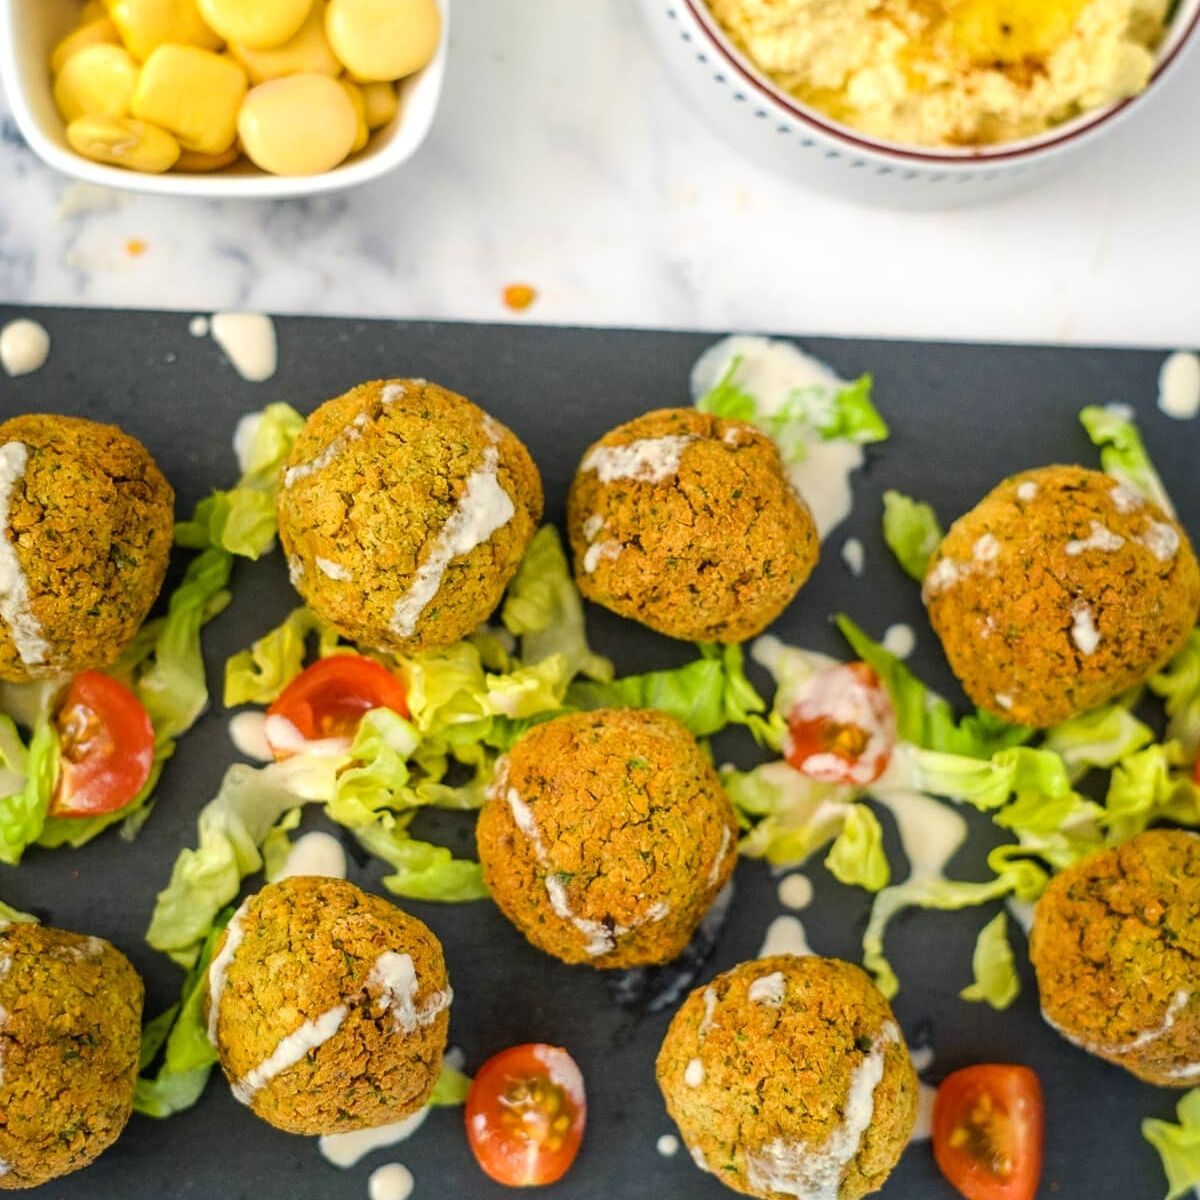 A tray of keto falafel balls and salad on a table.